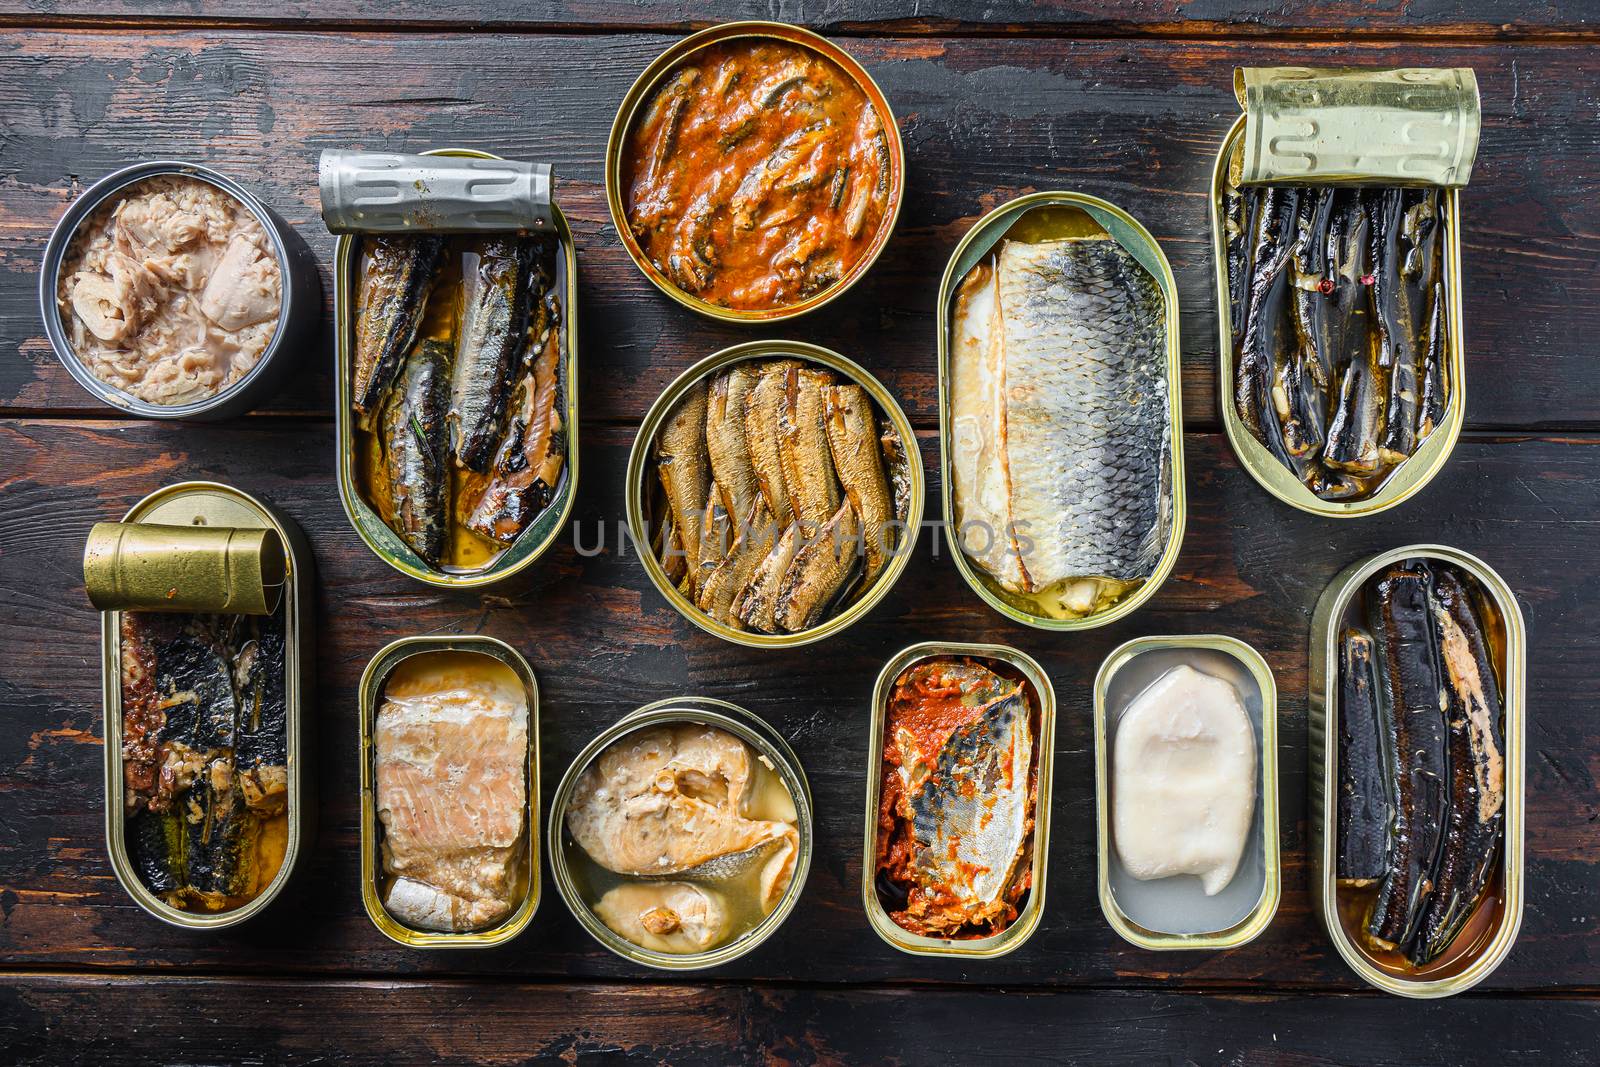 Top view of opened cans with Saury, mackerel, sprats, sardines, pilchard, squid, tuna over vintage pub wood table .